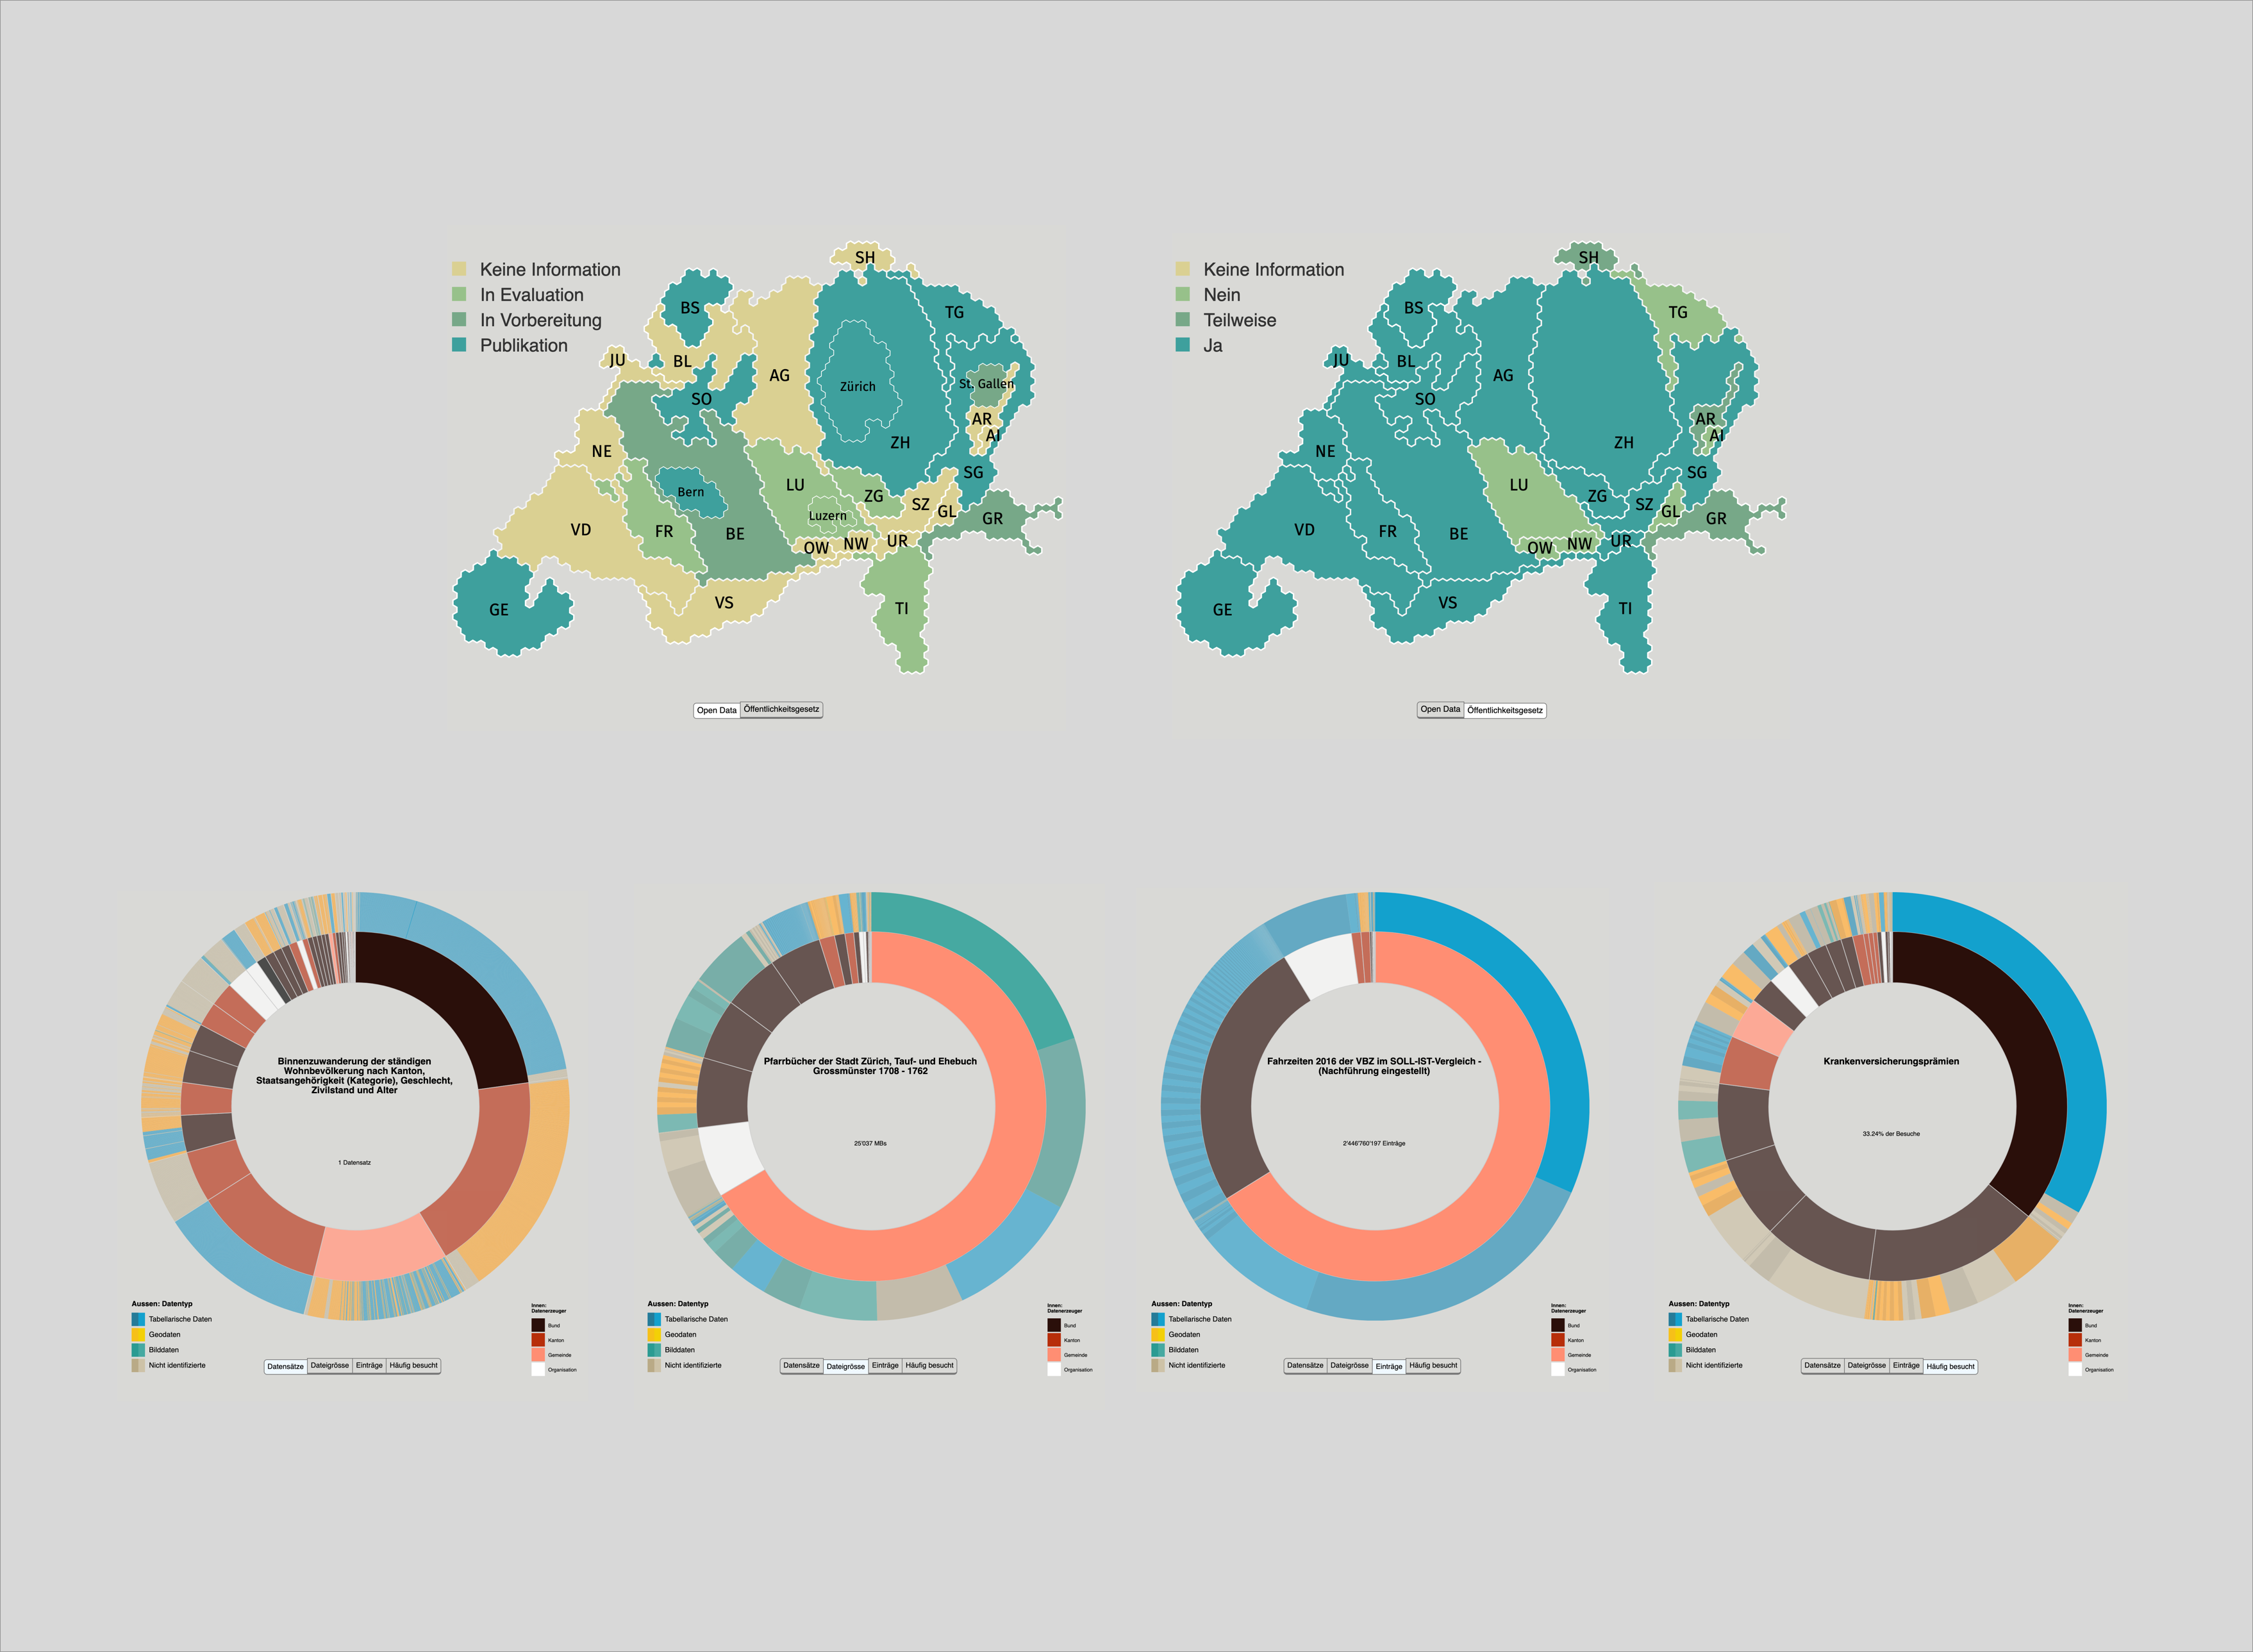 Visualizations for the article on the current state of the Open Data movement in Switzerland